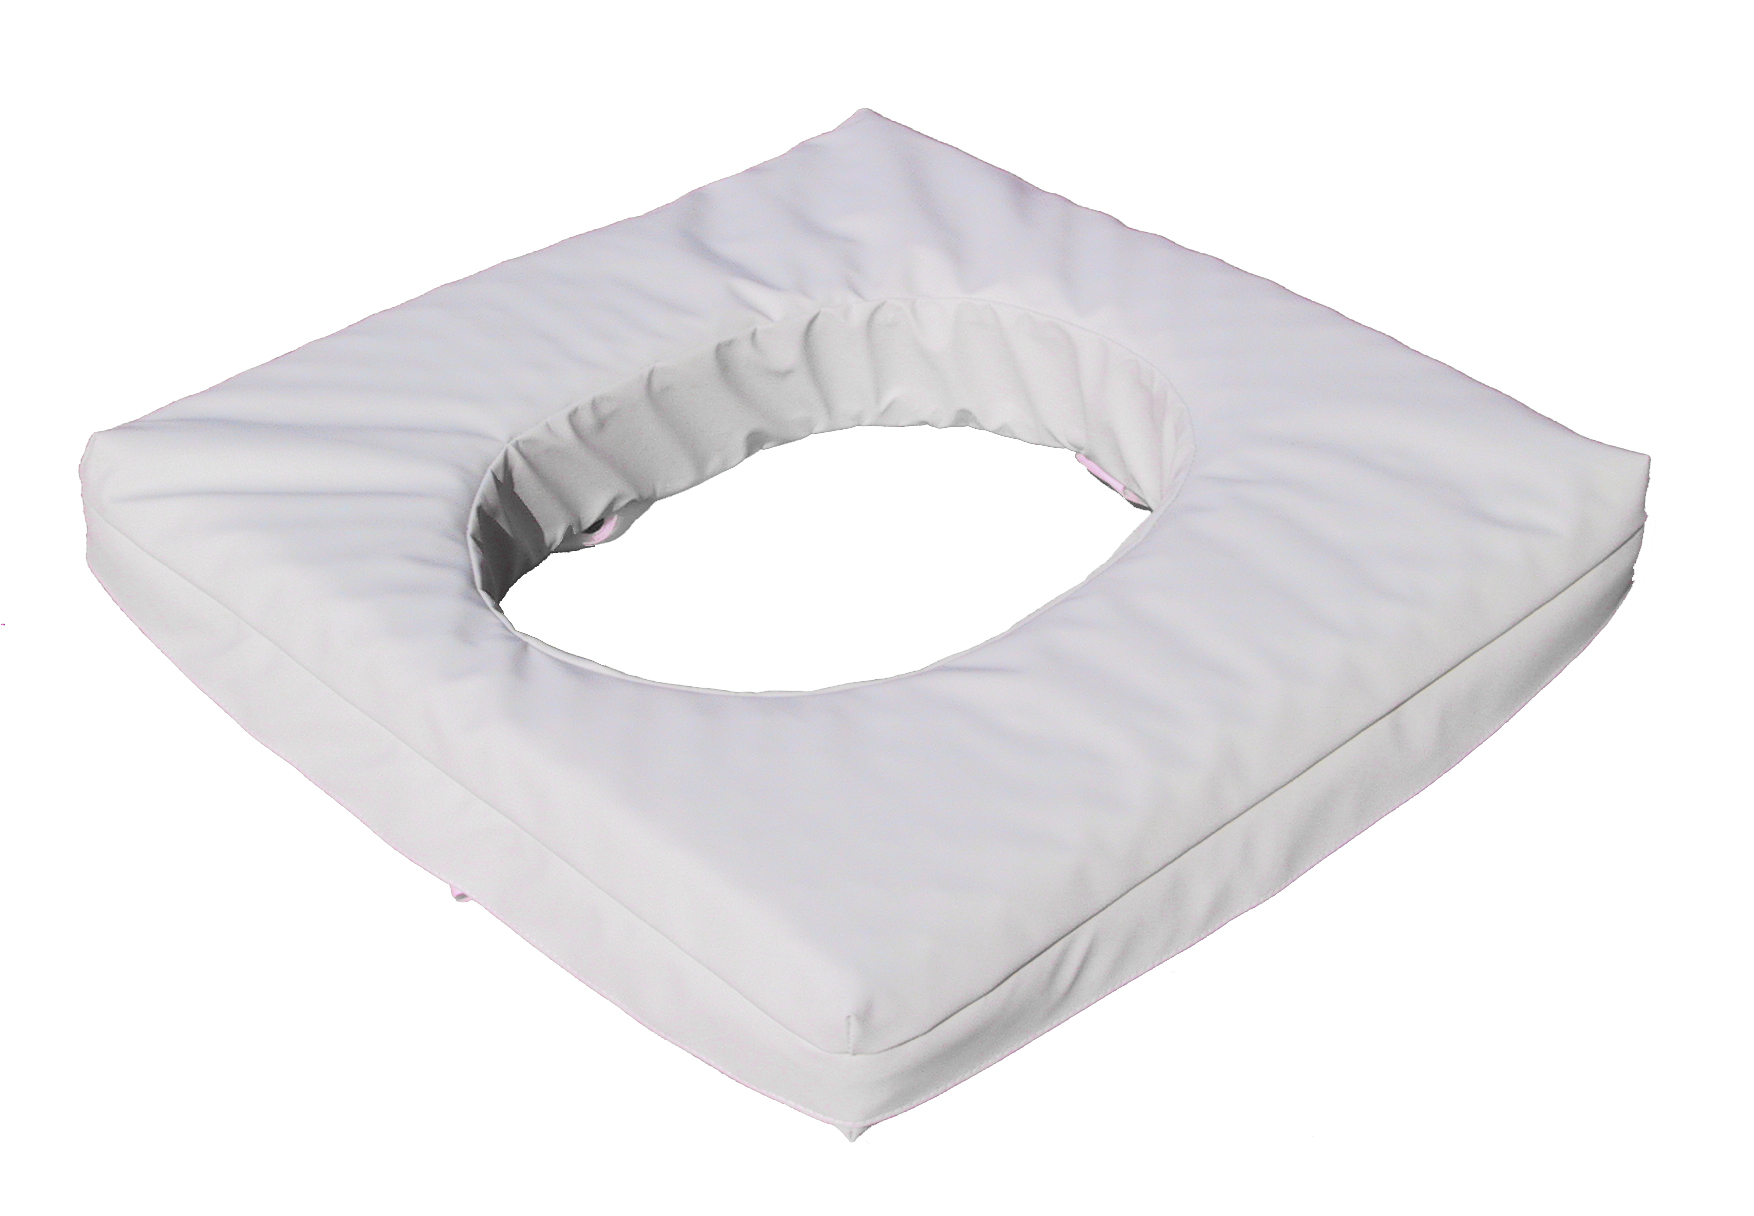 Pelvic pillow from Danish CARE Supply - AssistData